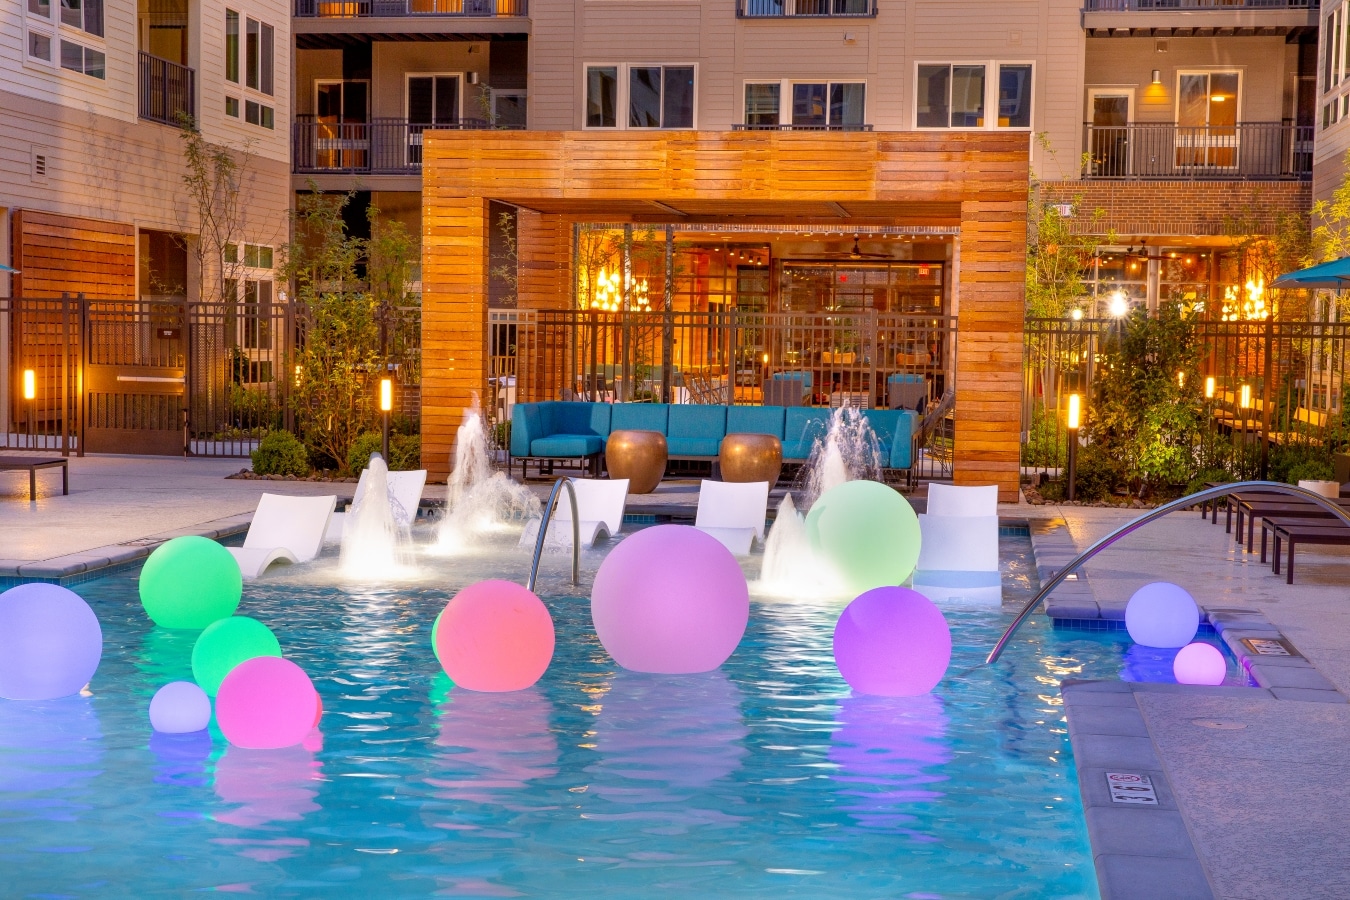 swimming pool at night with lit balls floating - south alex luxury apartments alexandria va